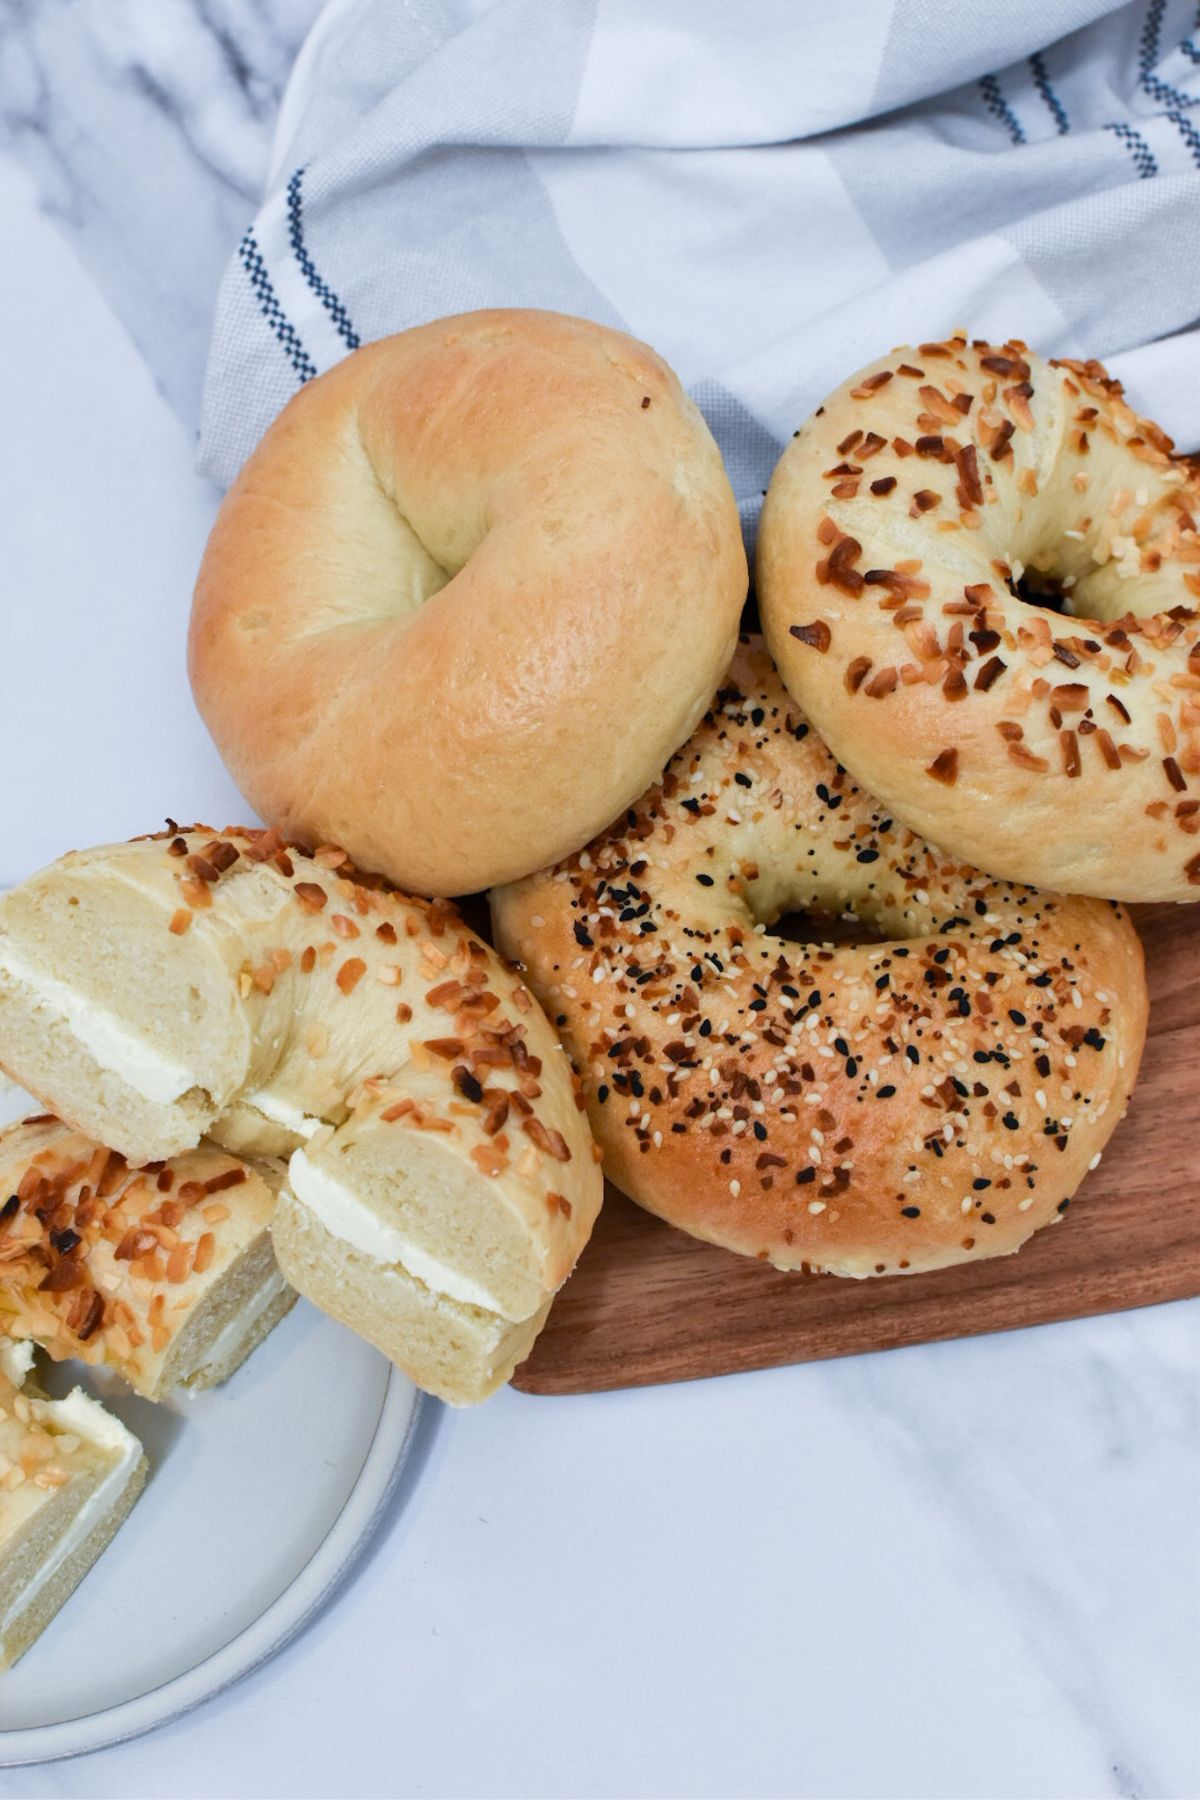 An onion bagel with cream cheese and a stack of bagels next to it.